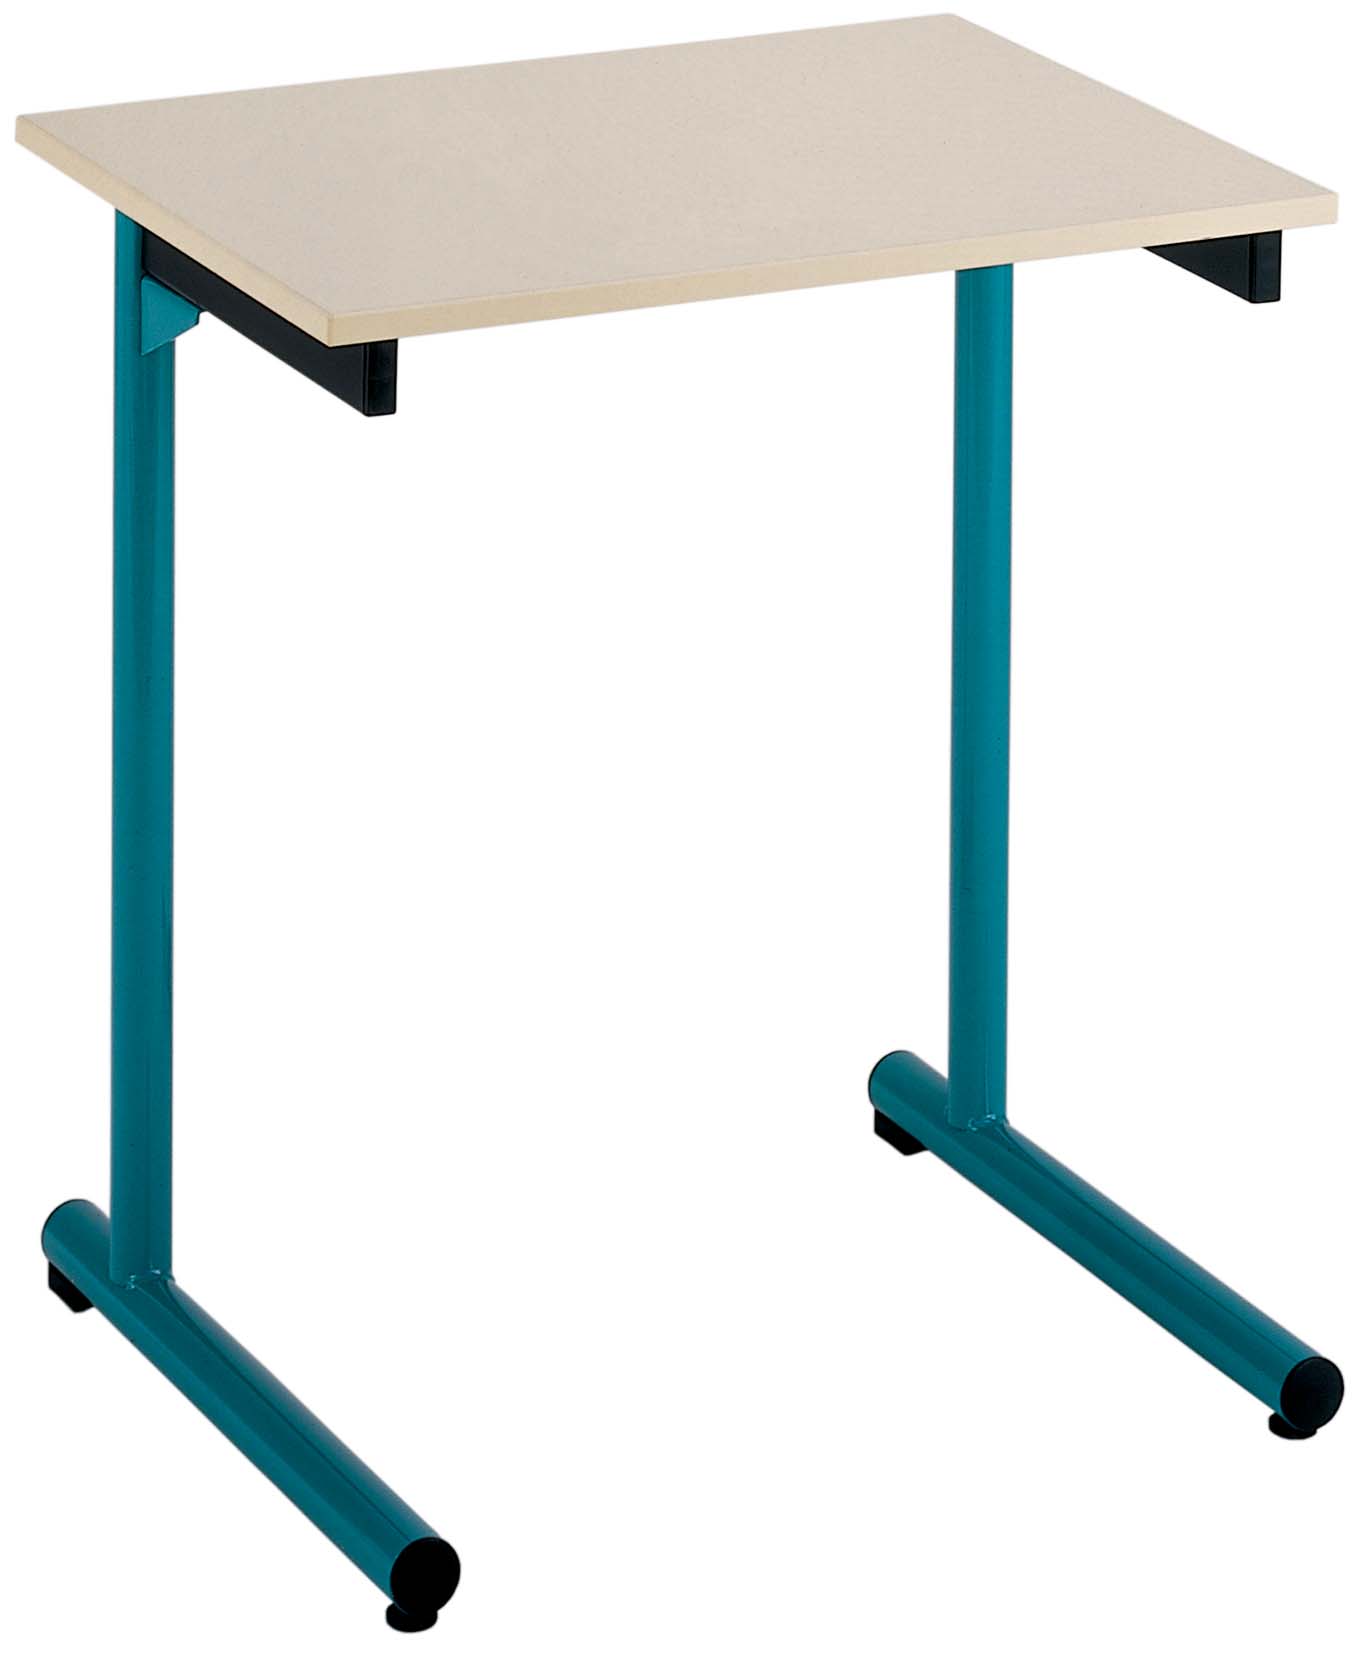 Table scolaire fixe START 2